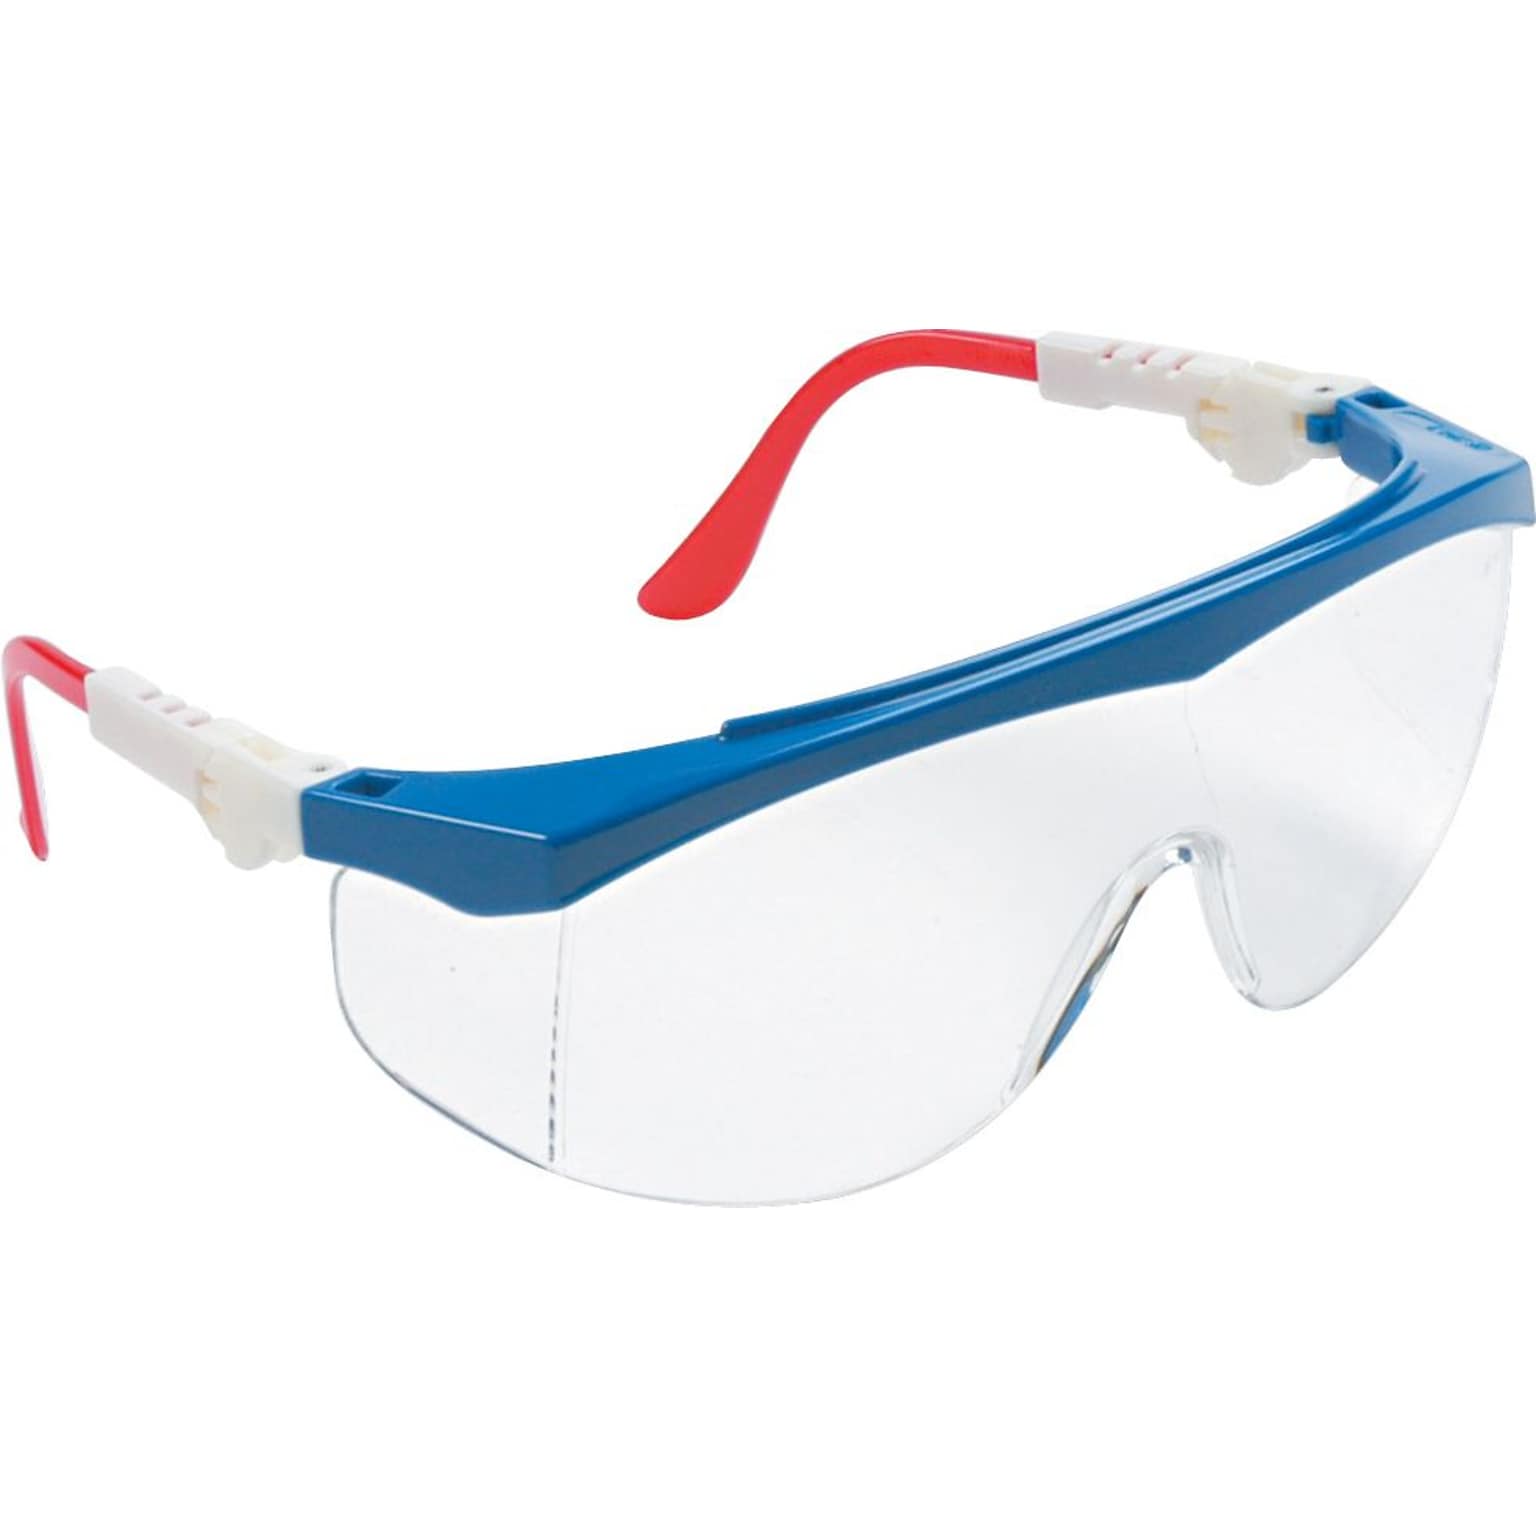 MCR Safety® Tomahawk® Safety Glasses, Red/White/Blue, Clear, Anti-Fog